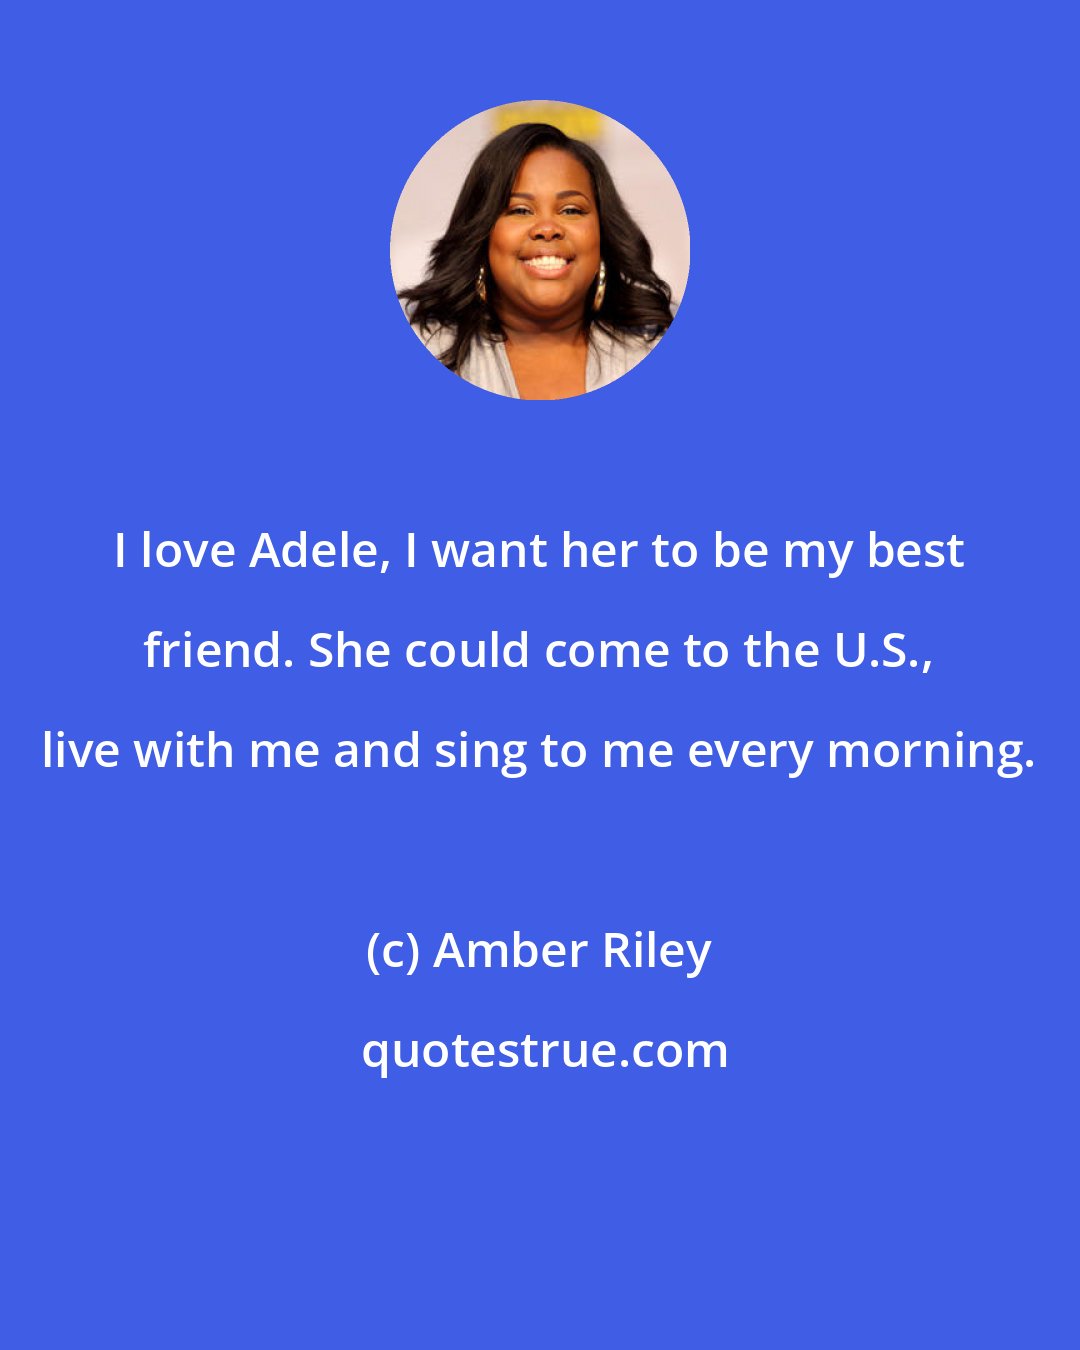 Amber Riley: I love Adele, I want her to be my best friend. She could come to the U.S., live with me and sing to me every morning.